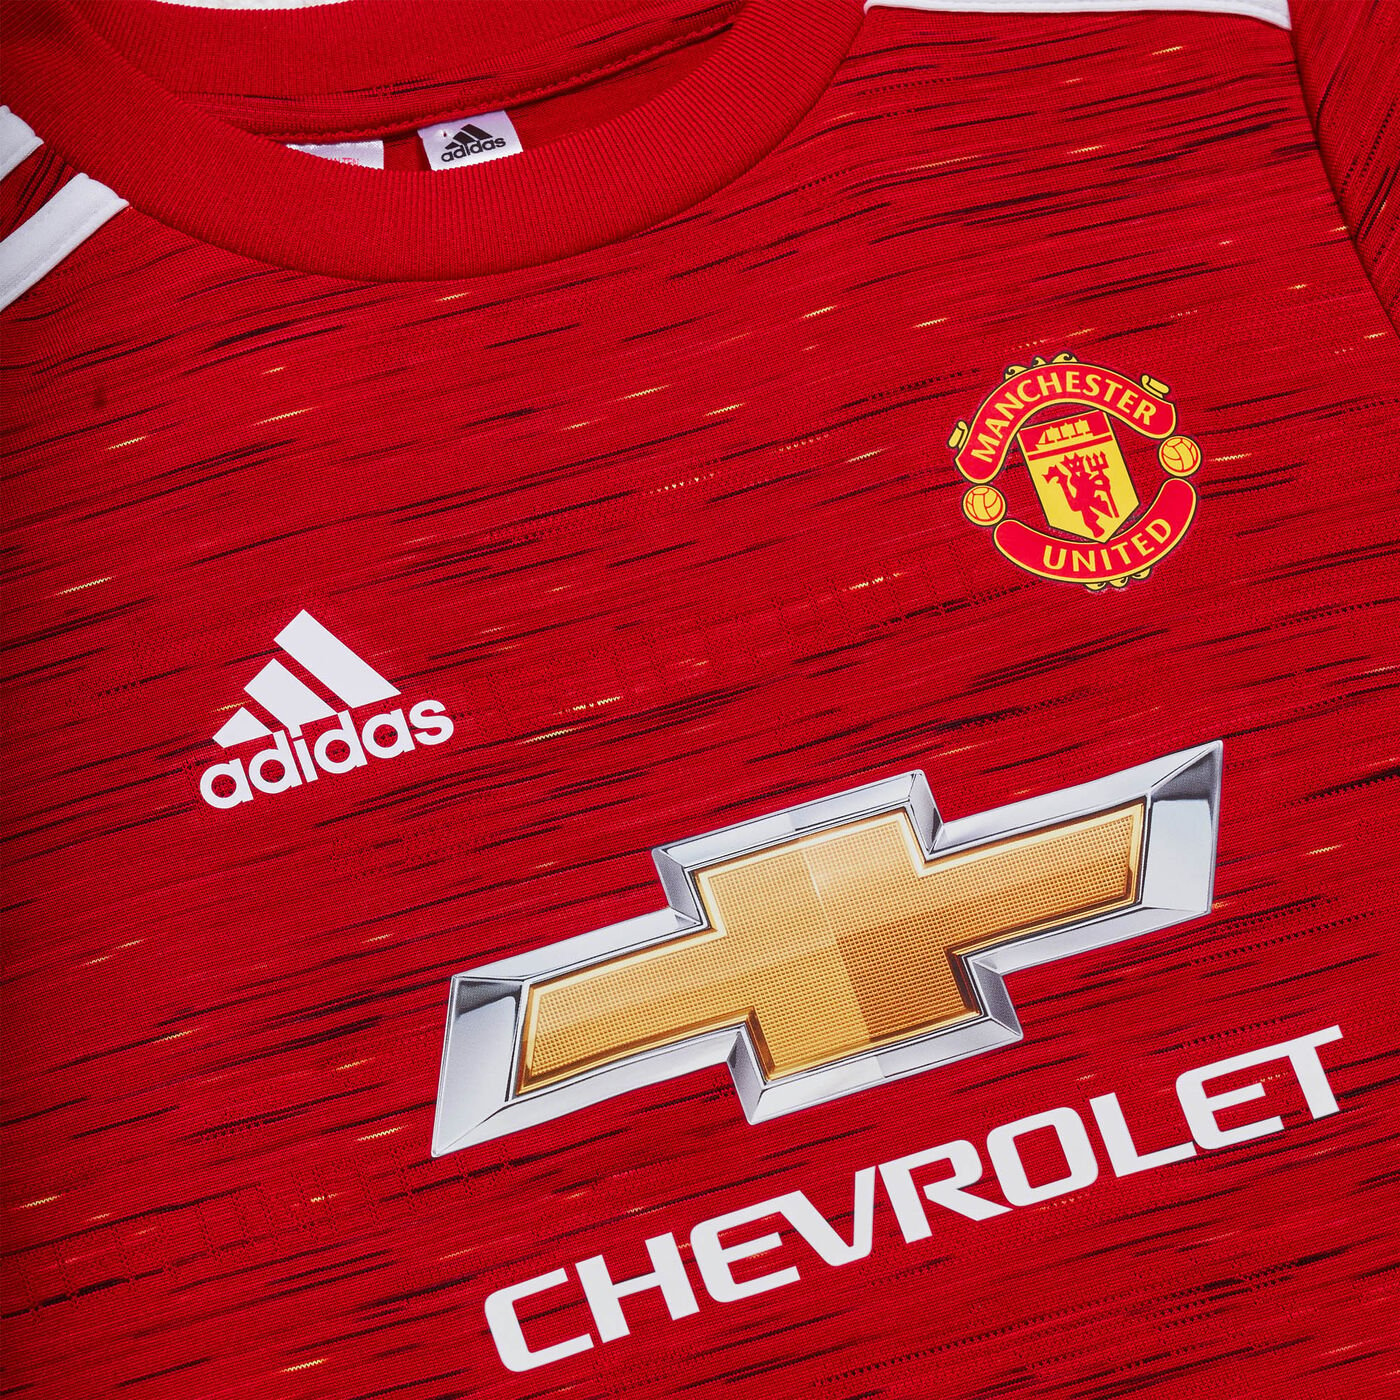 Kids' Manchester United Home Kit - 2020/21 (Younger Kids)